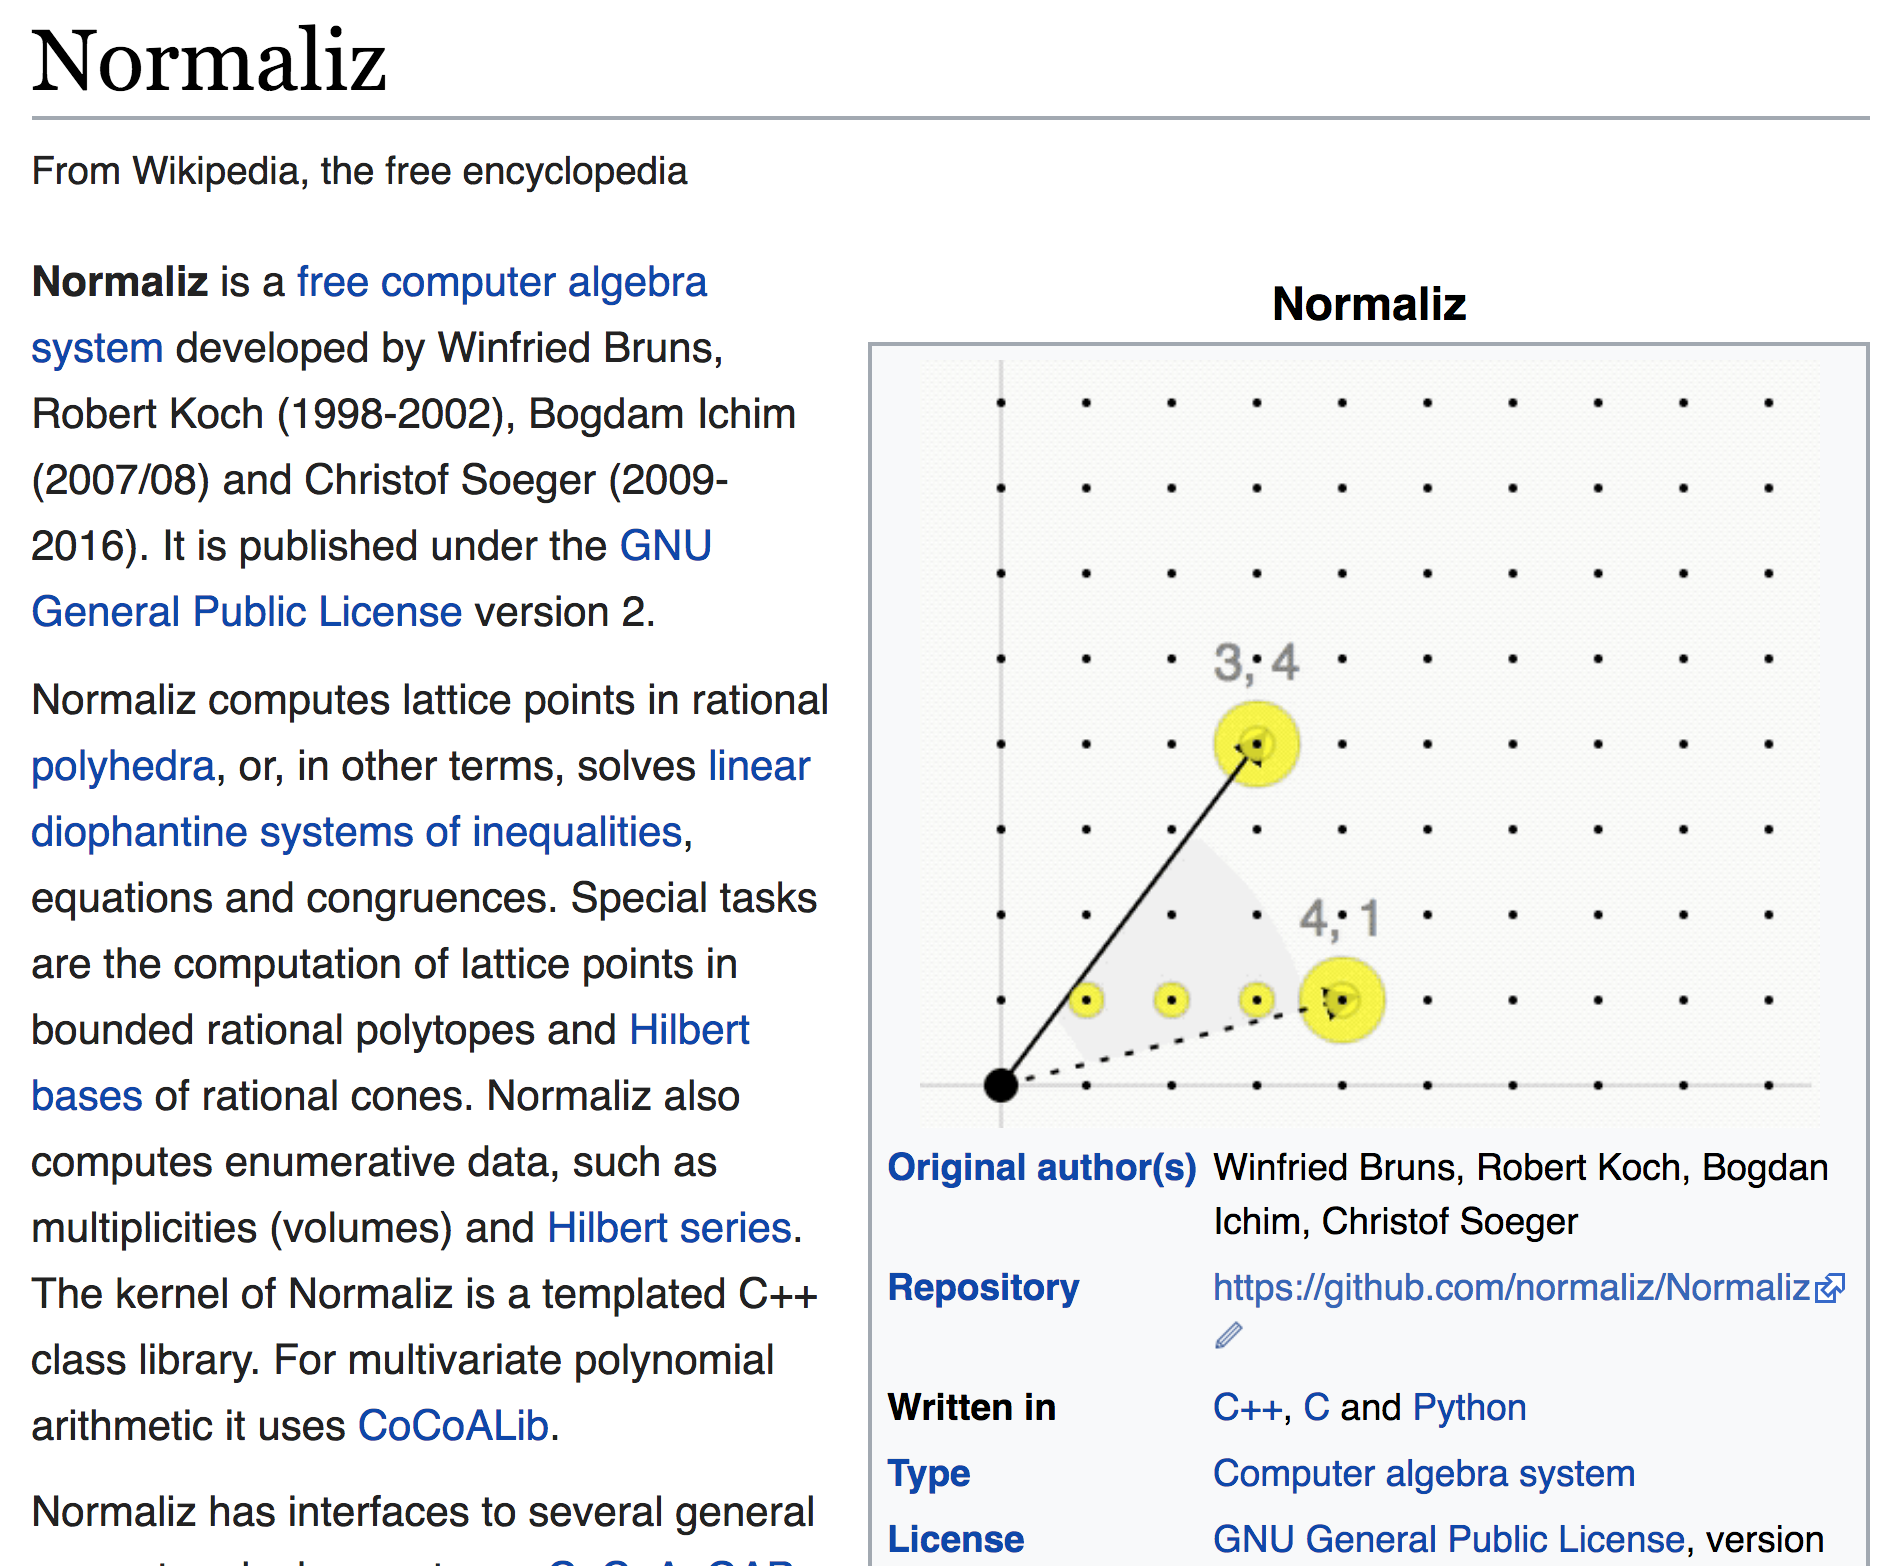 _images/normaliz-wiki.png